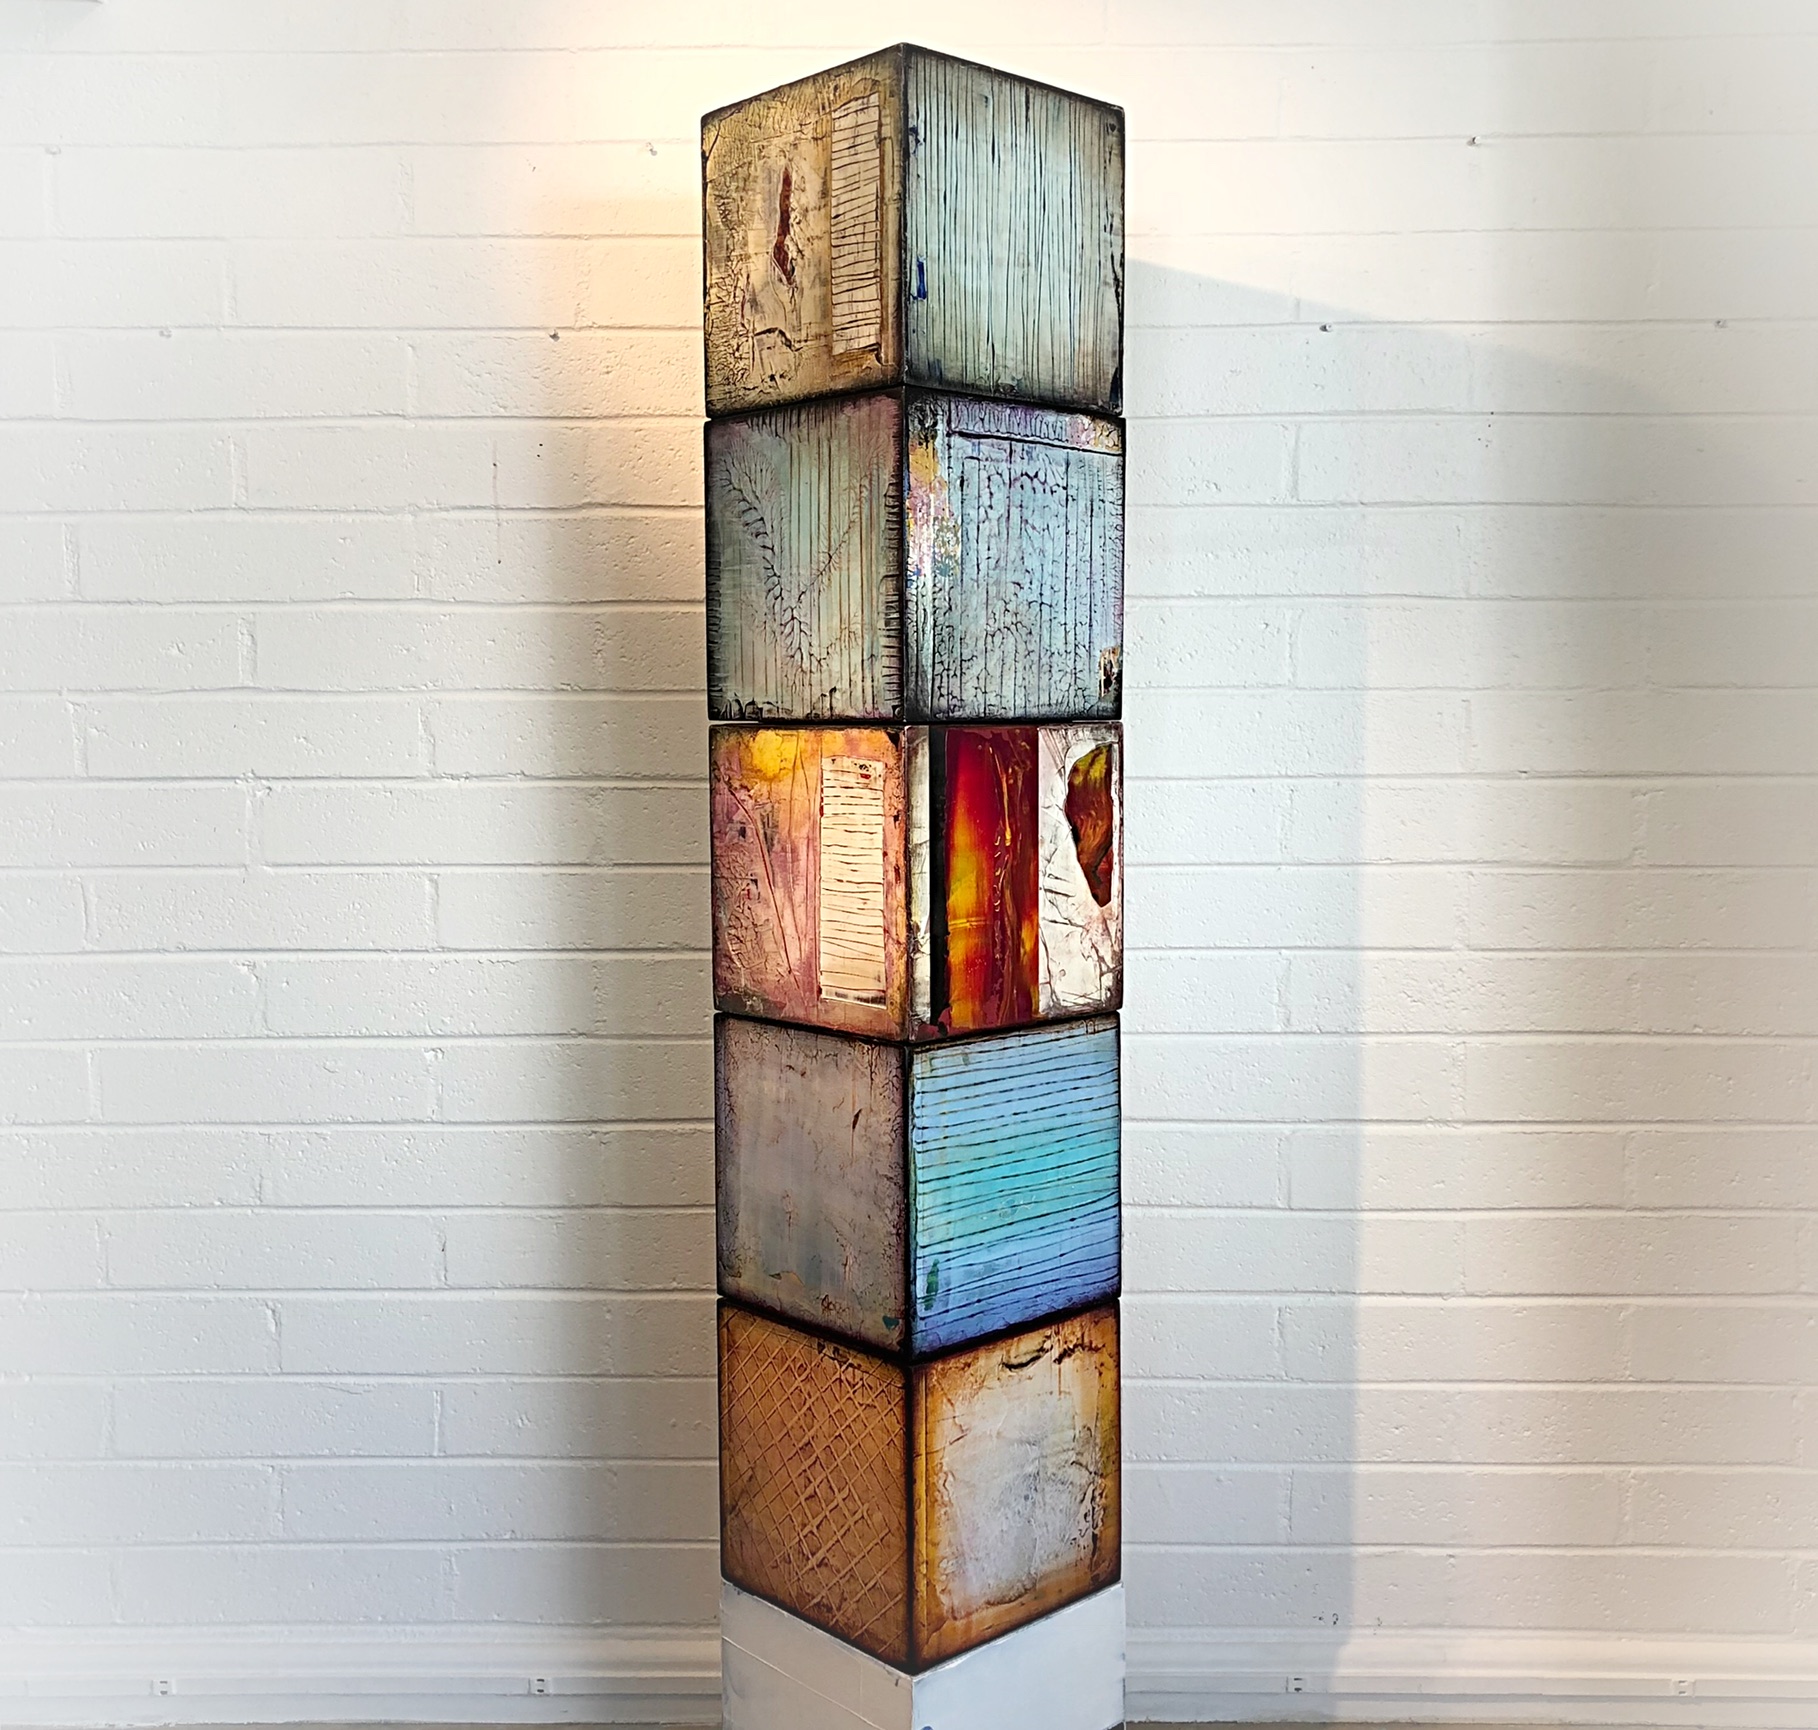  ART CUBE SCULPTURE: Created to order on commission. 12” sq cube may be sold separately.  